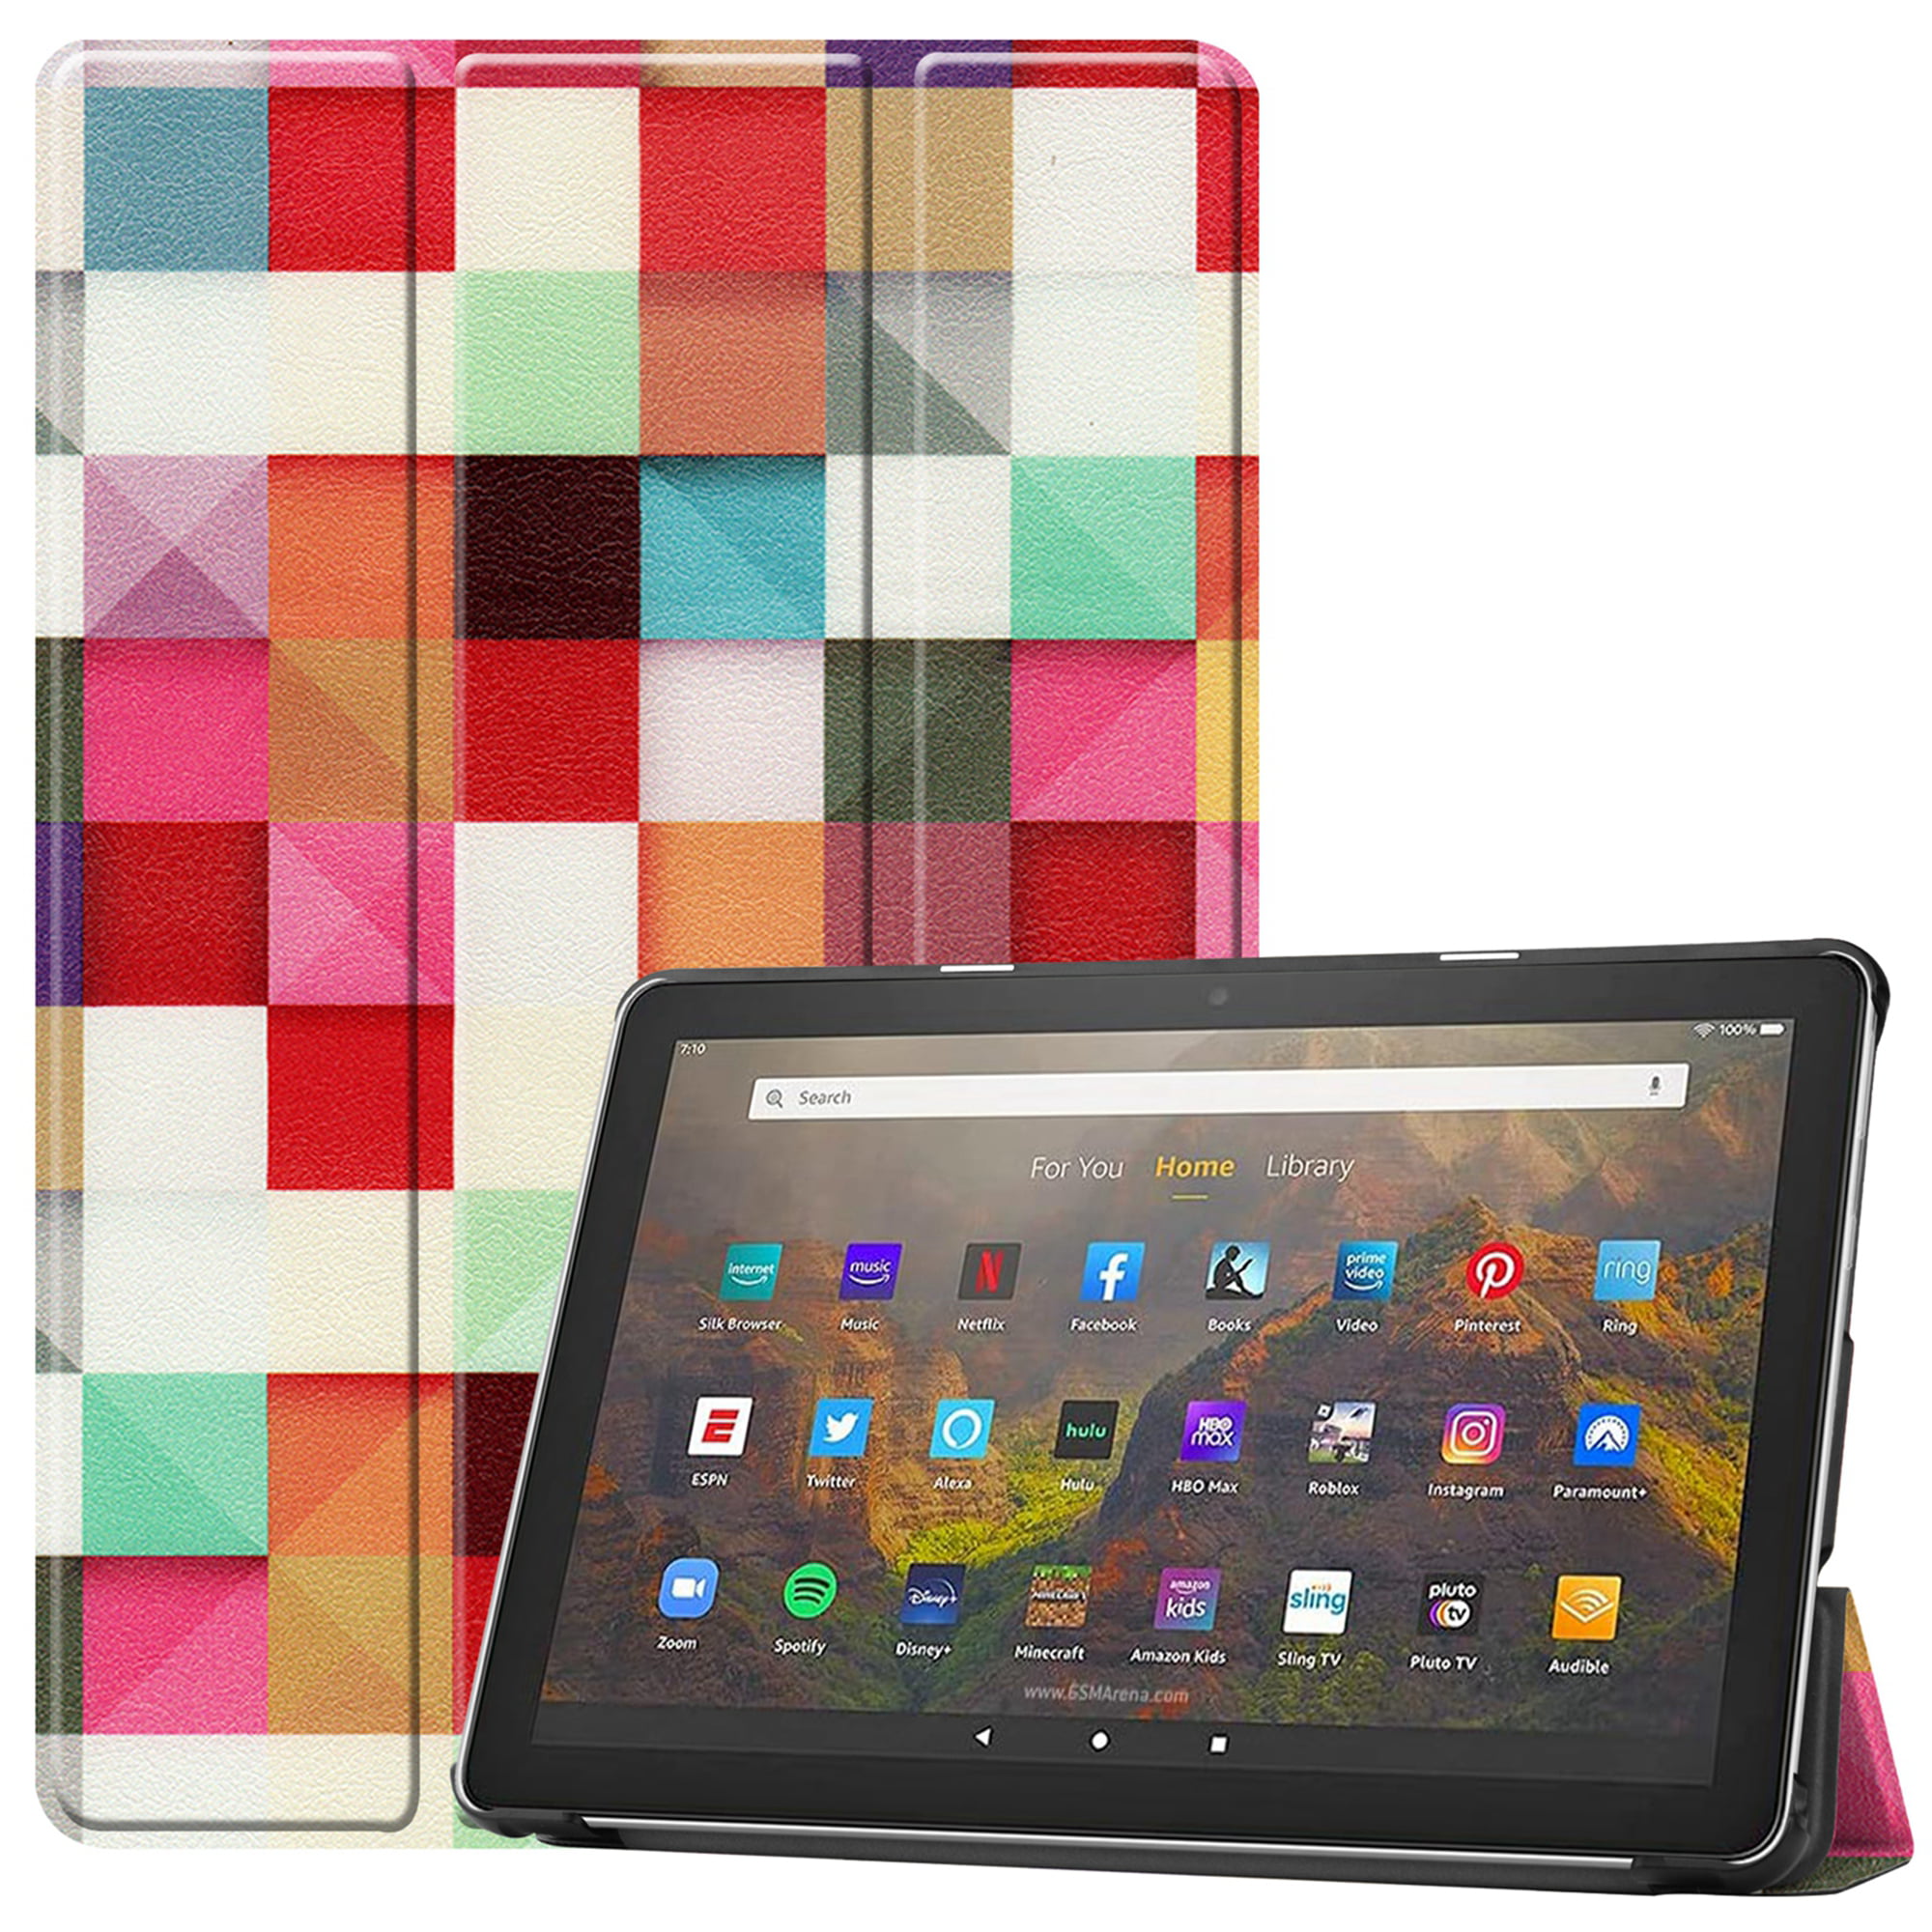 jetech case for amazon fire hd 10 tablet promo code